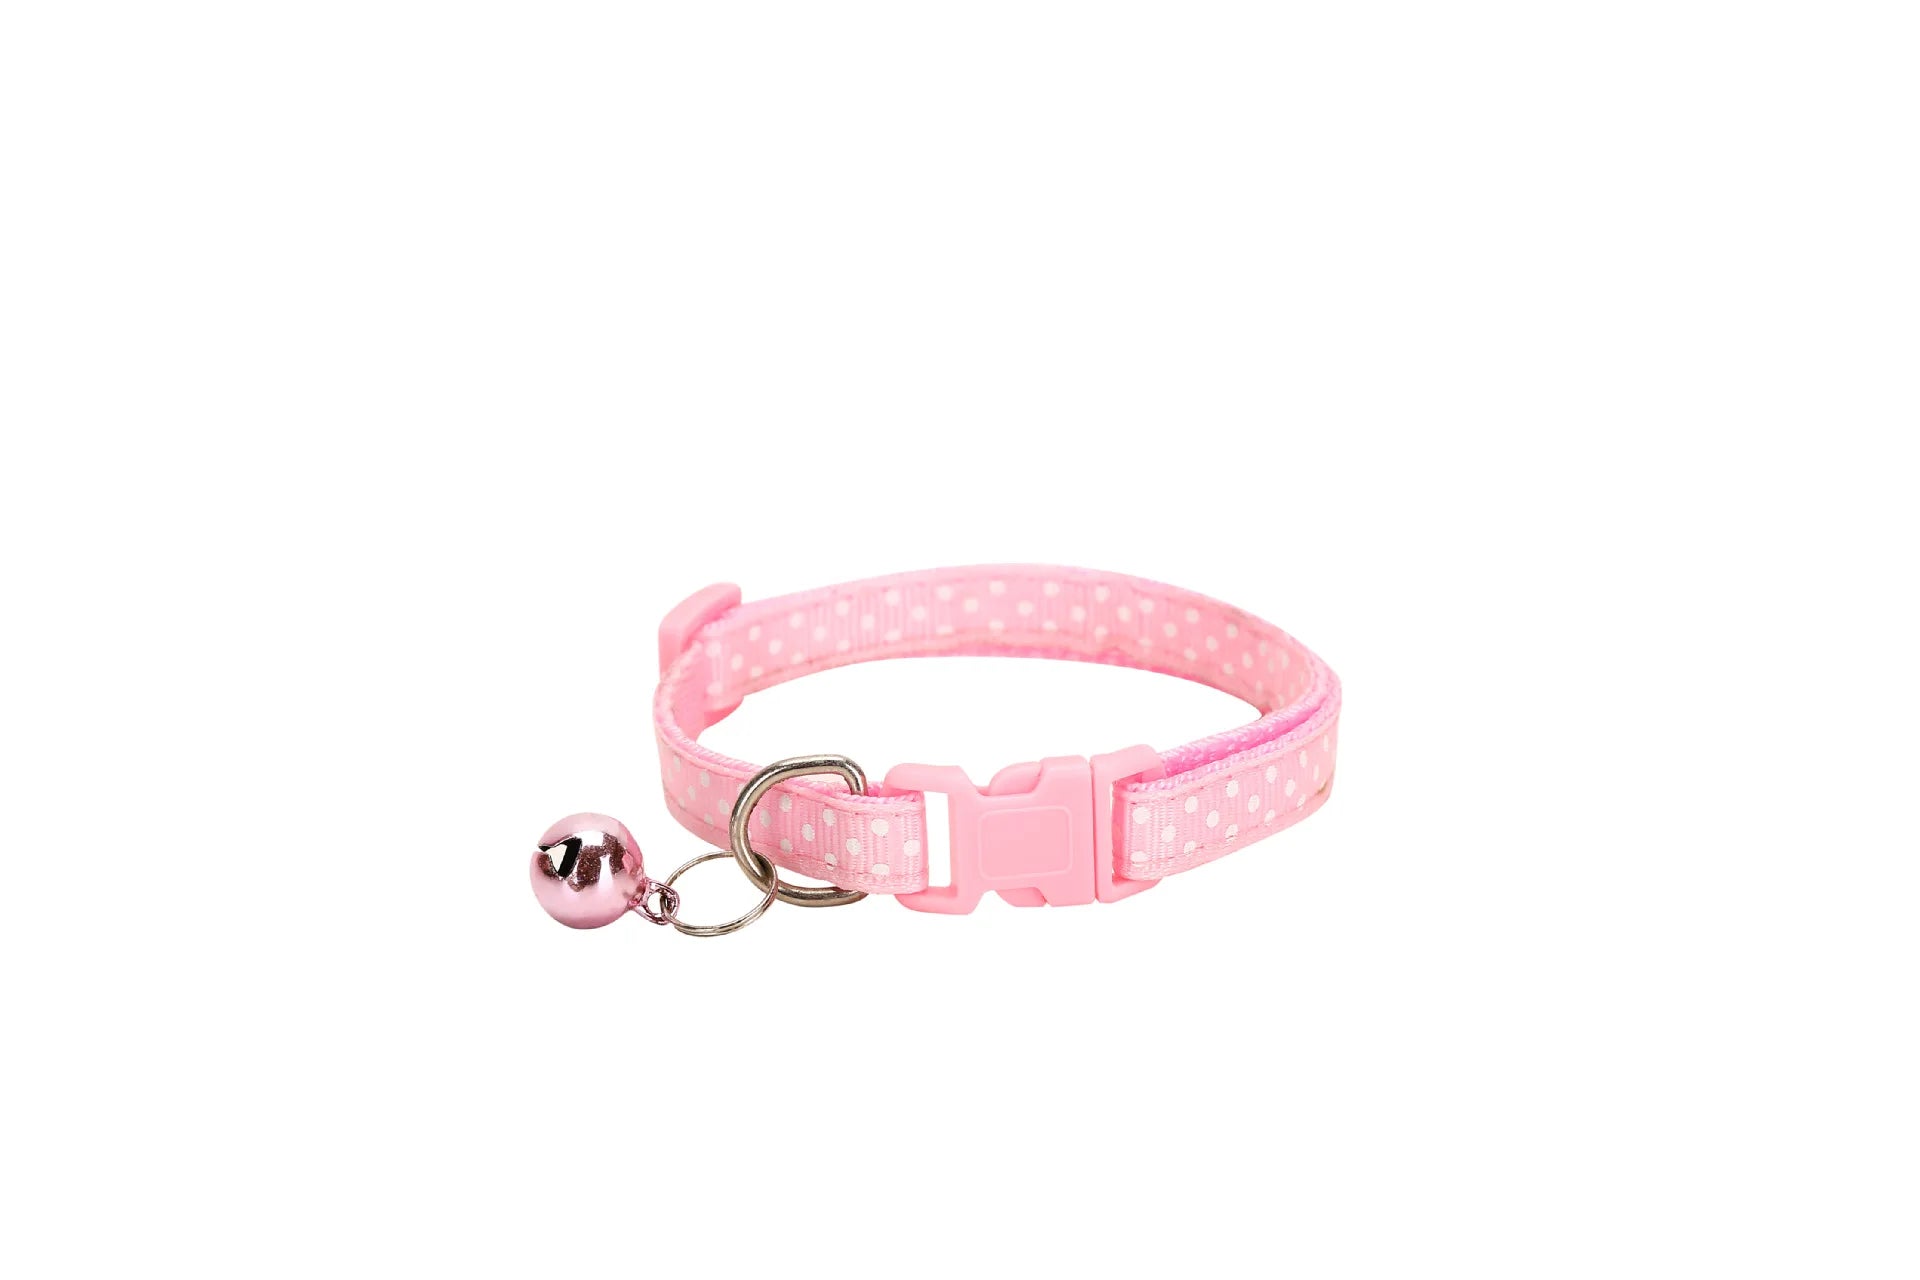 Reflective Pet Collar with Bell Dot Design: Enhance Visibility, Comfort, and Style  petlums.com Pink CHINA 